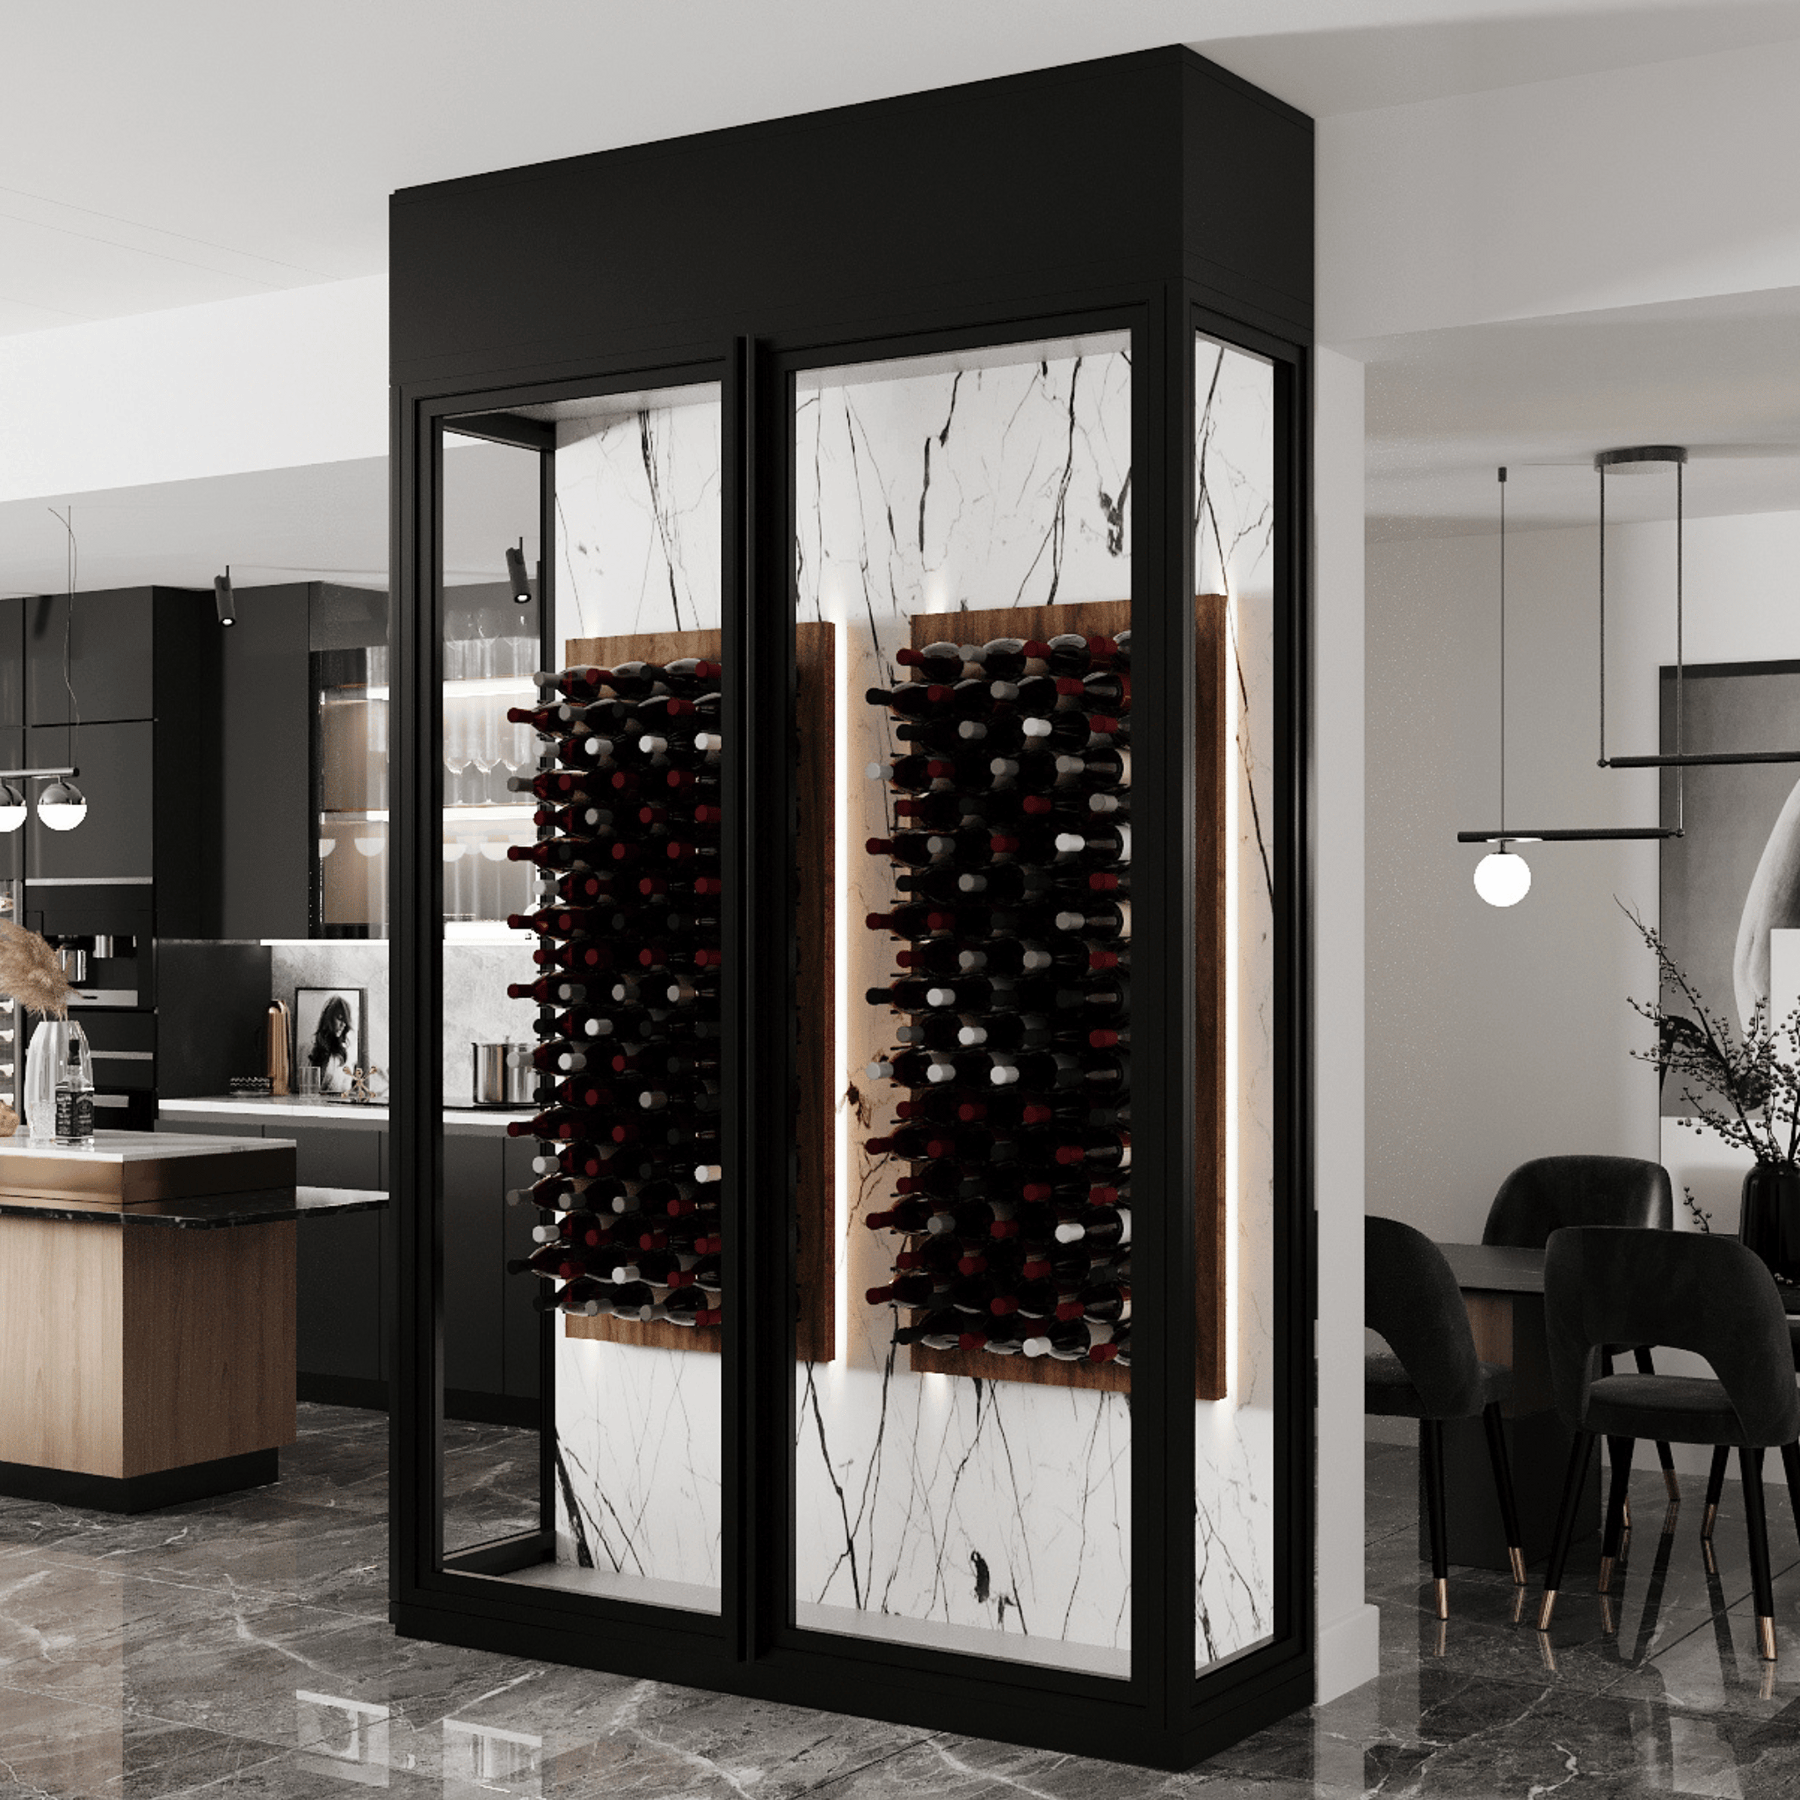 7 Glass Wine Cellar Challenges and Solutions